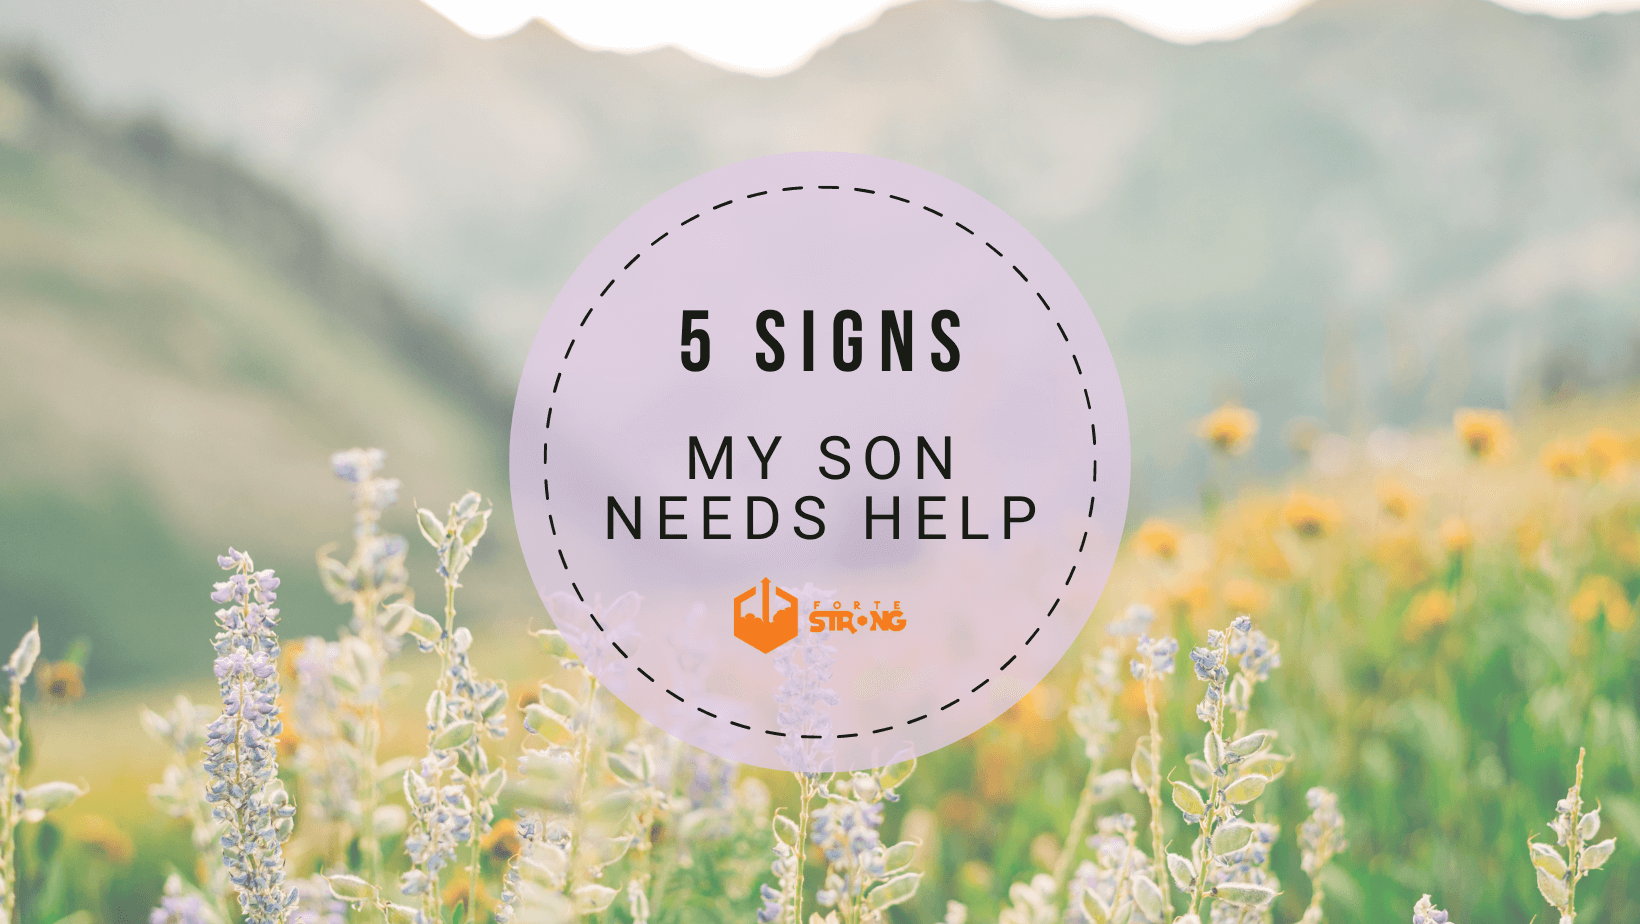 5 Signs My Son Needs Help